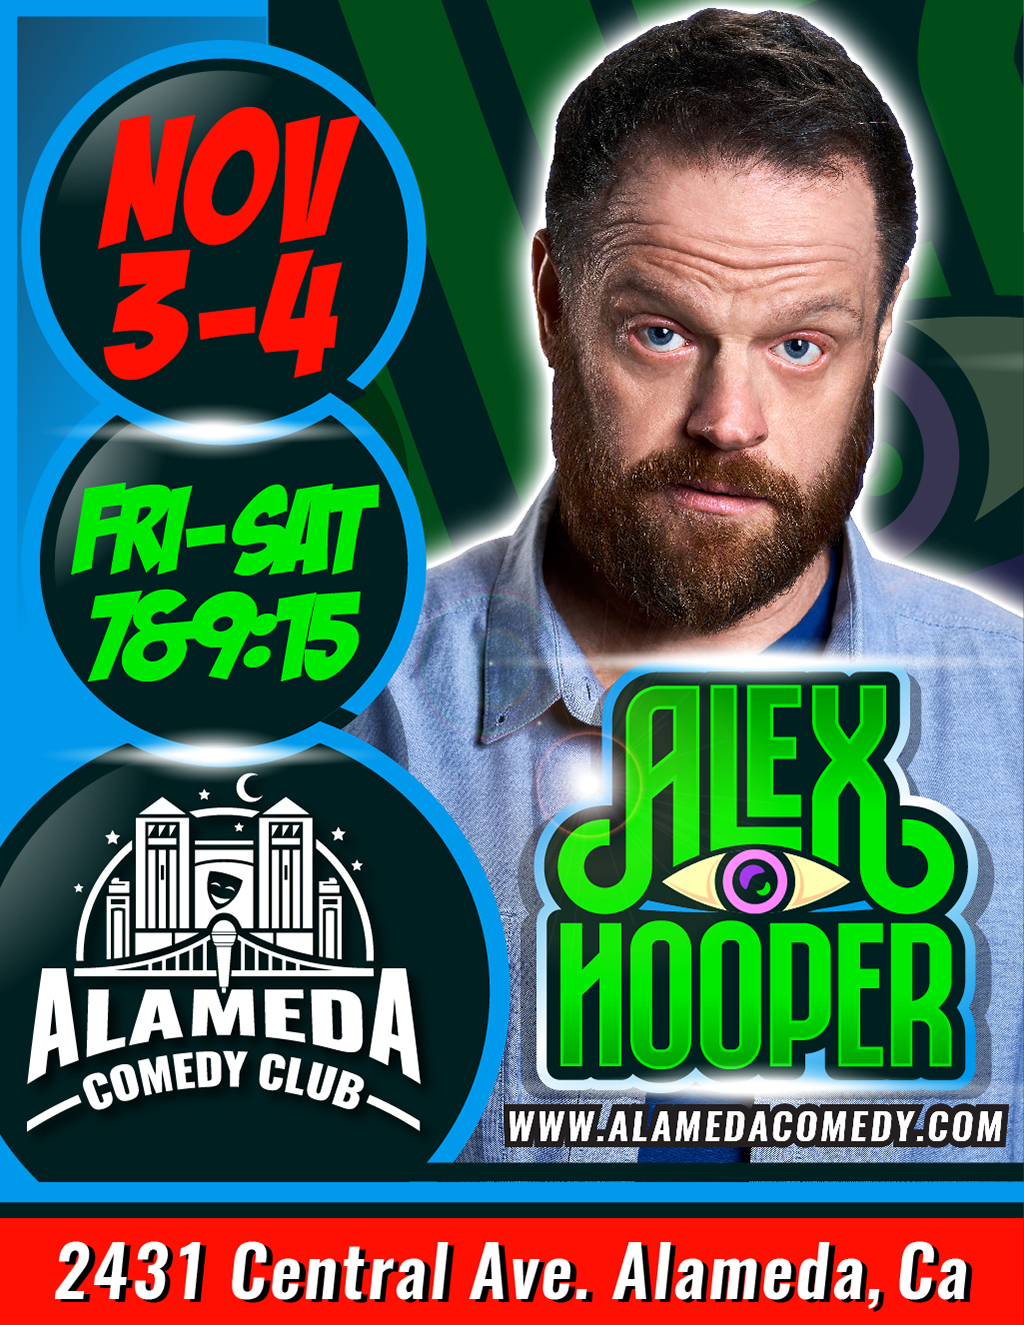 Alameda Comedy Club Get Ready for a Riot of Laughter at Hooper Comedy Club promotion flier on Digifli com